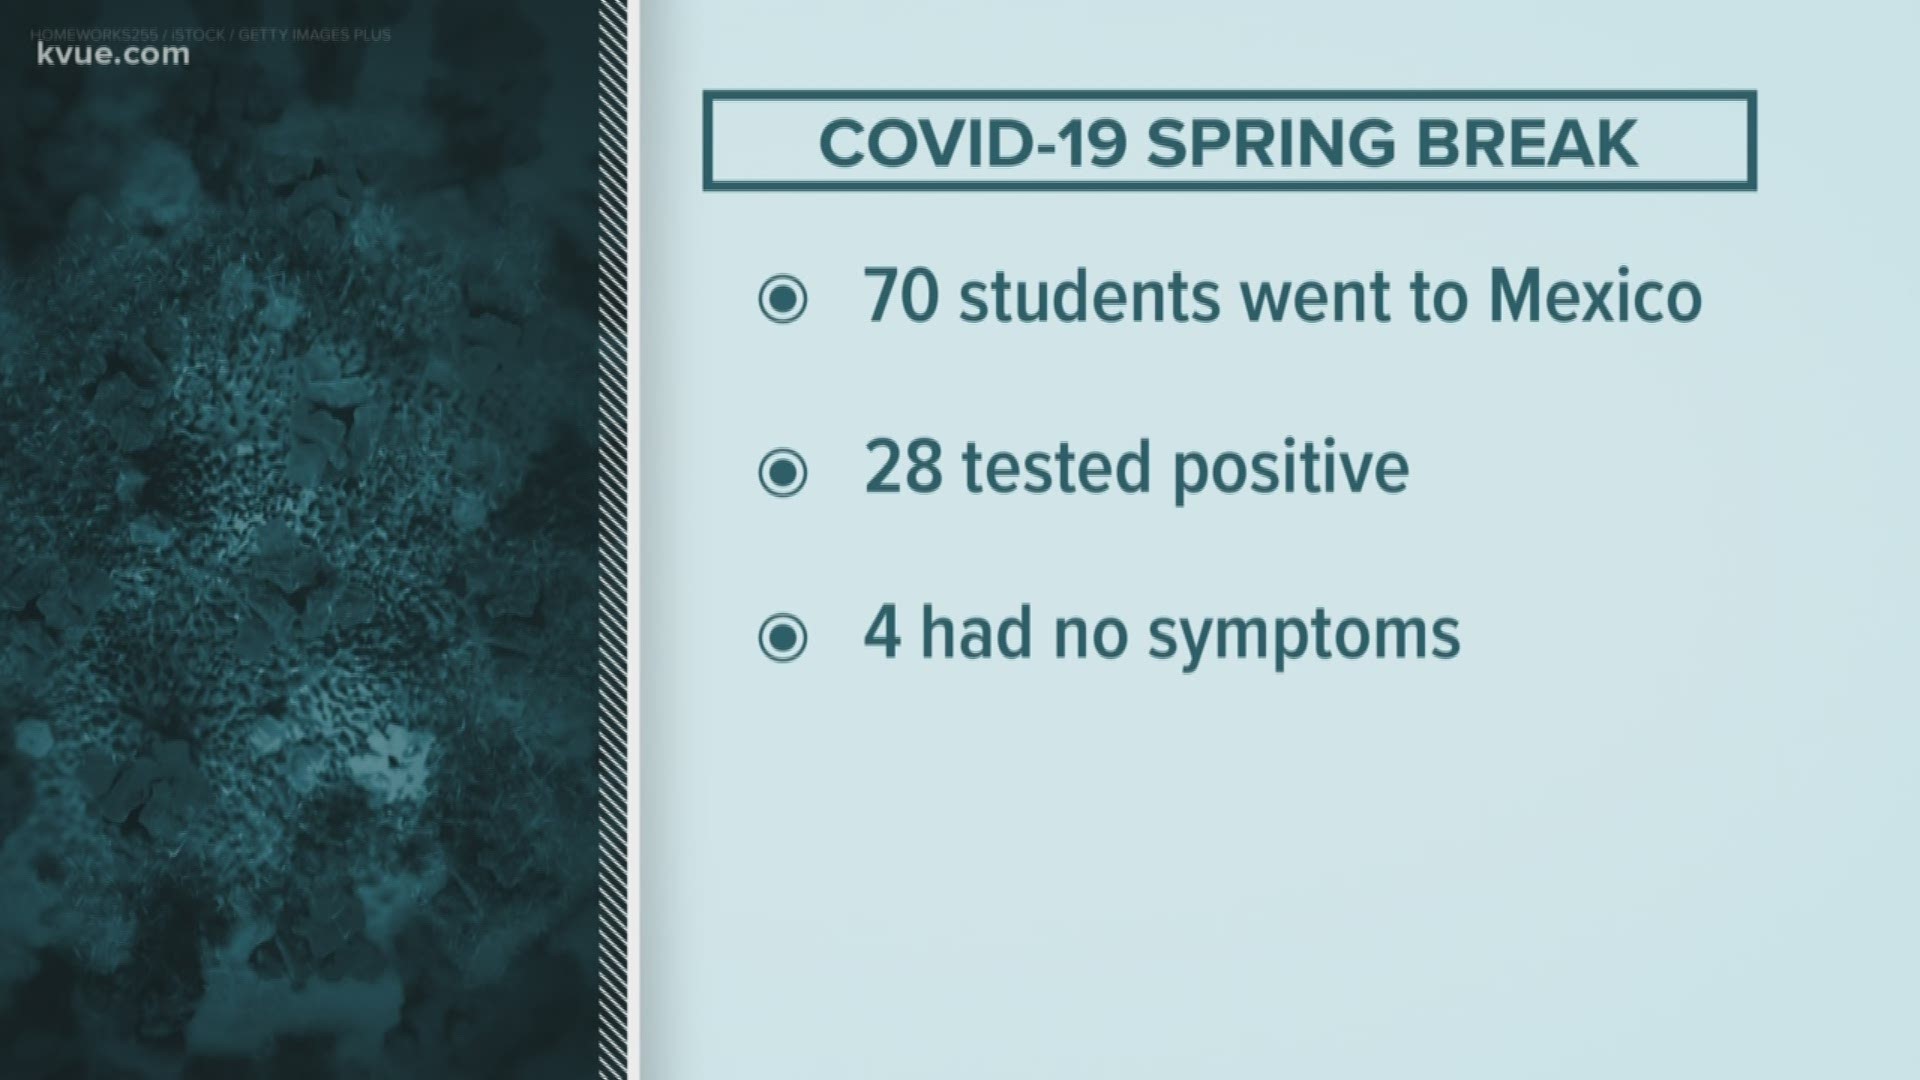 A group of UT students tested positive for COVID-19 after a spring break trip to Mexico.